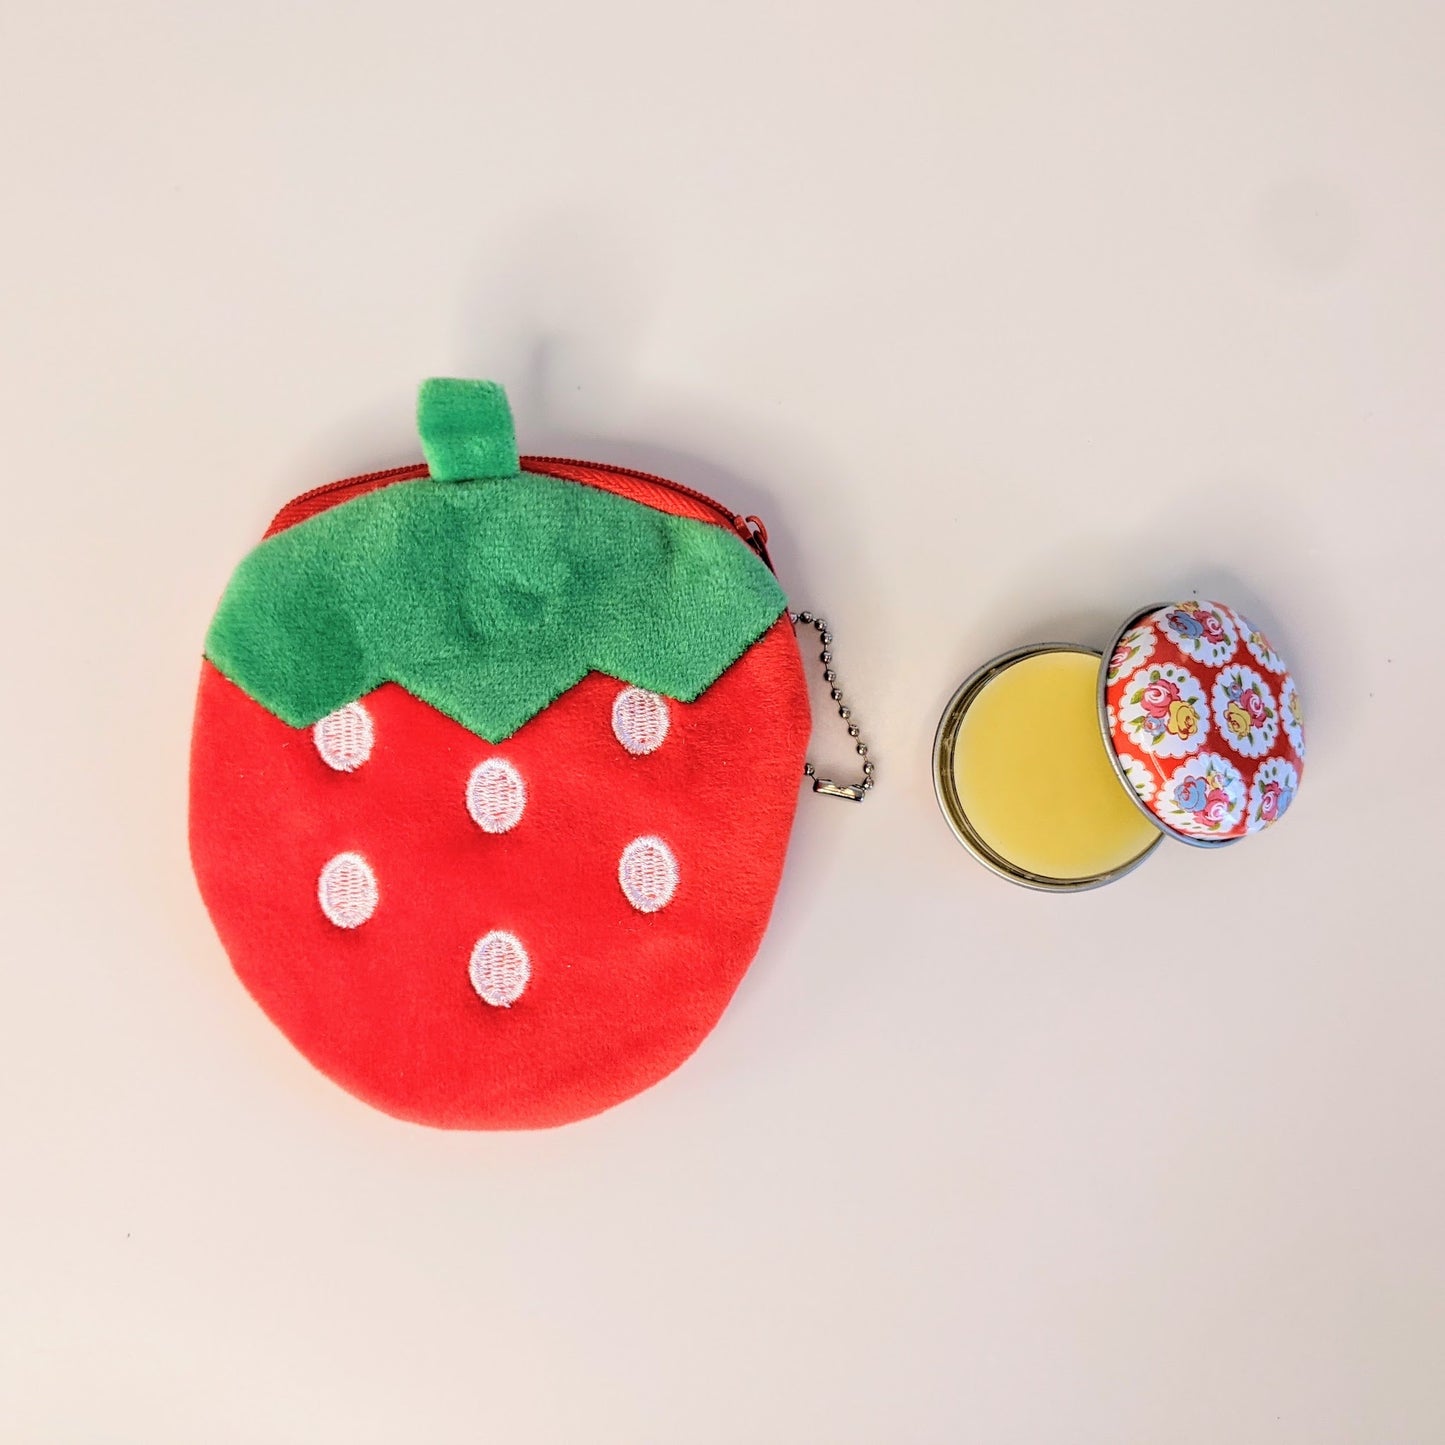 Soft plush bright red and green strawberry shaped coin purse next to open lip balm tin.